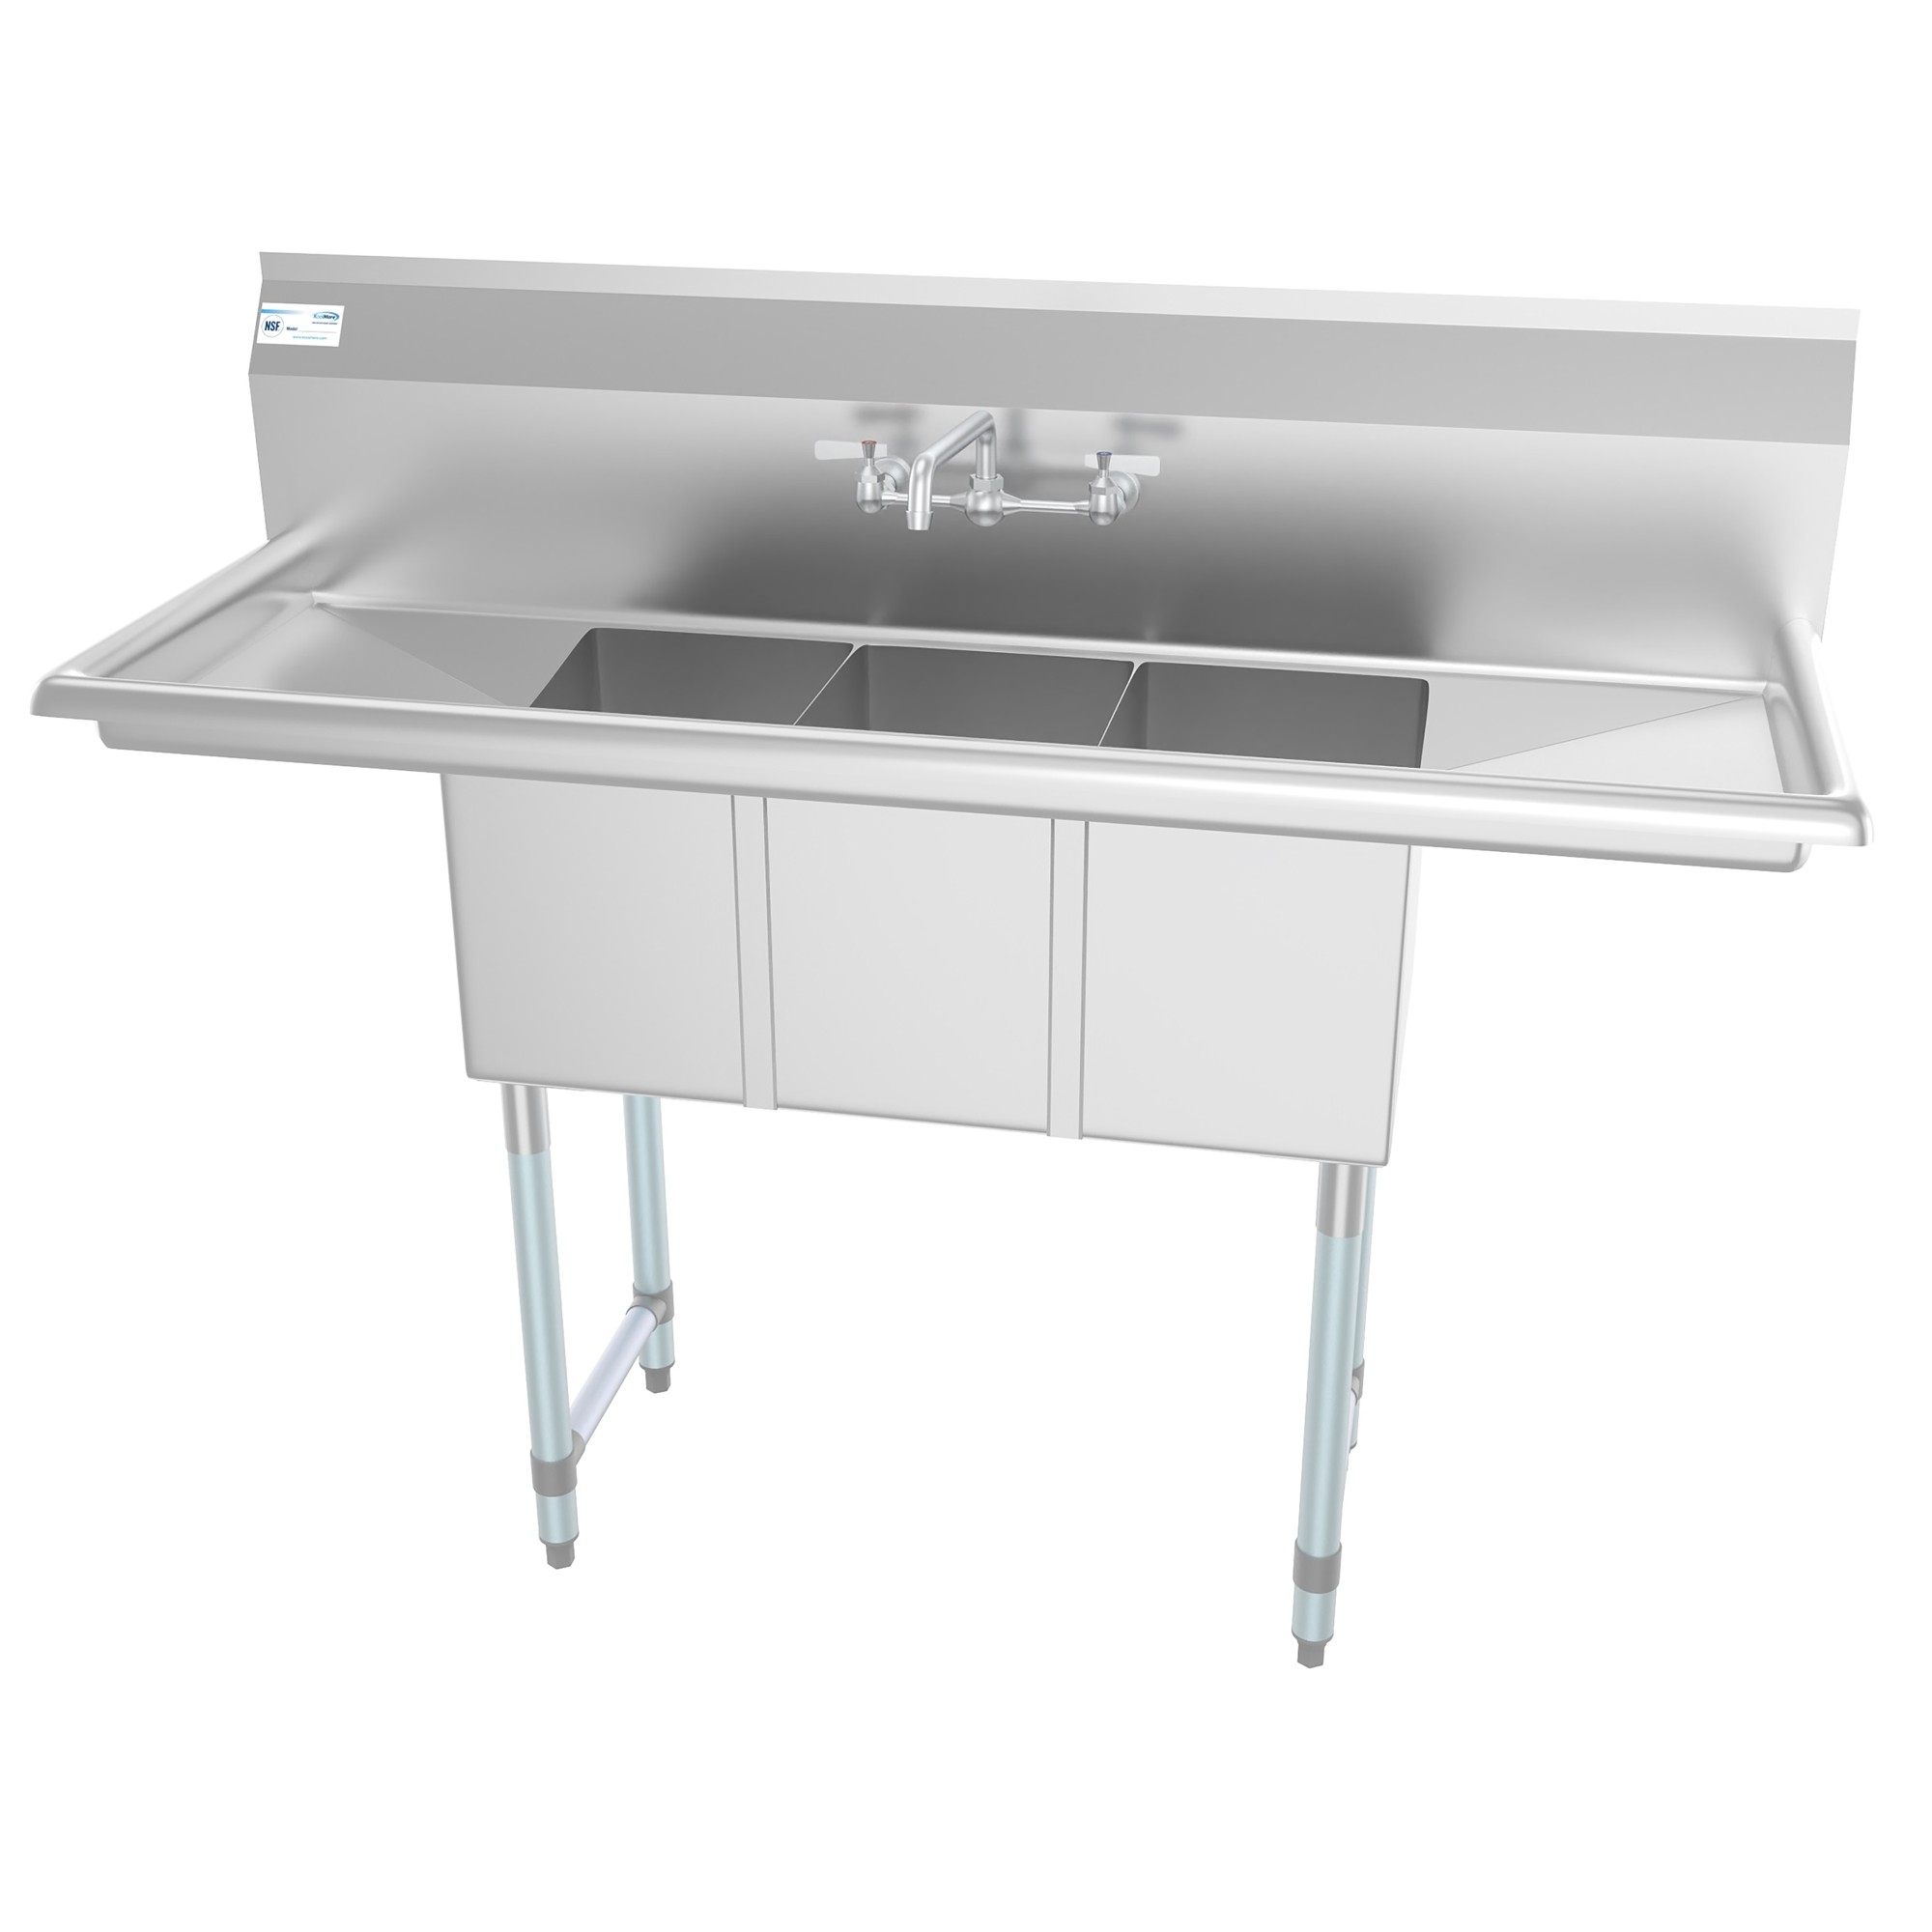 Koolmore SC101410-12B3FA 54" Three Compartment Stainless Steel Sink with Drainboards and Faucet